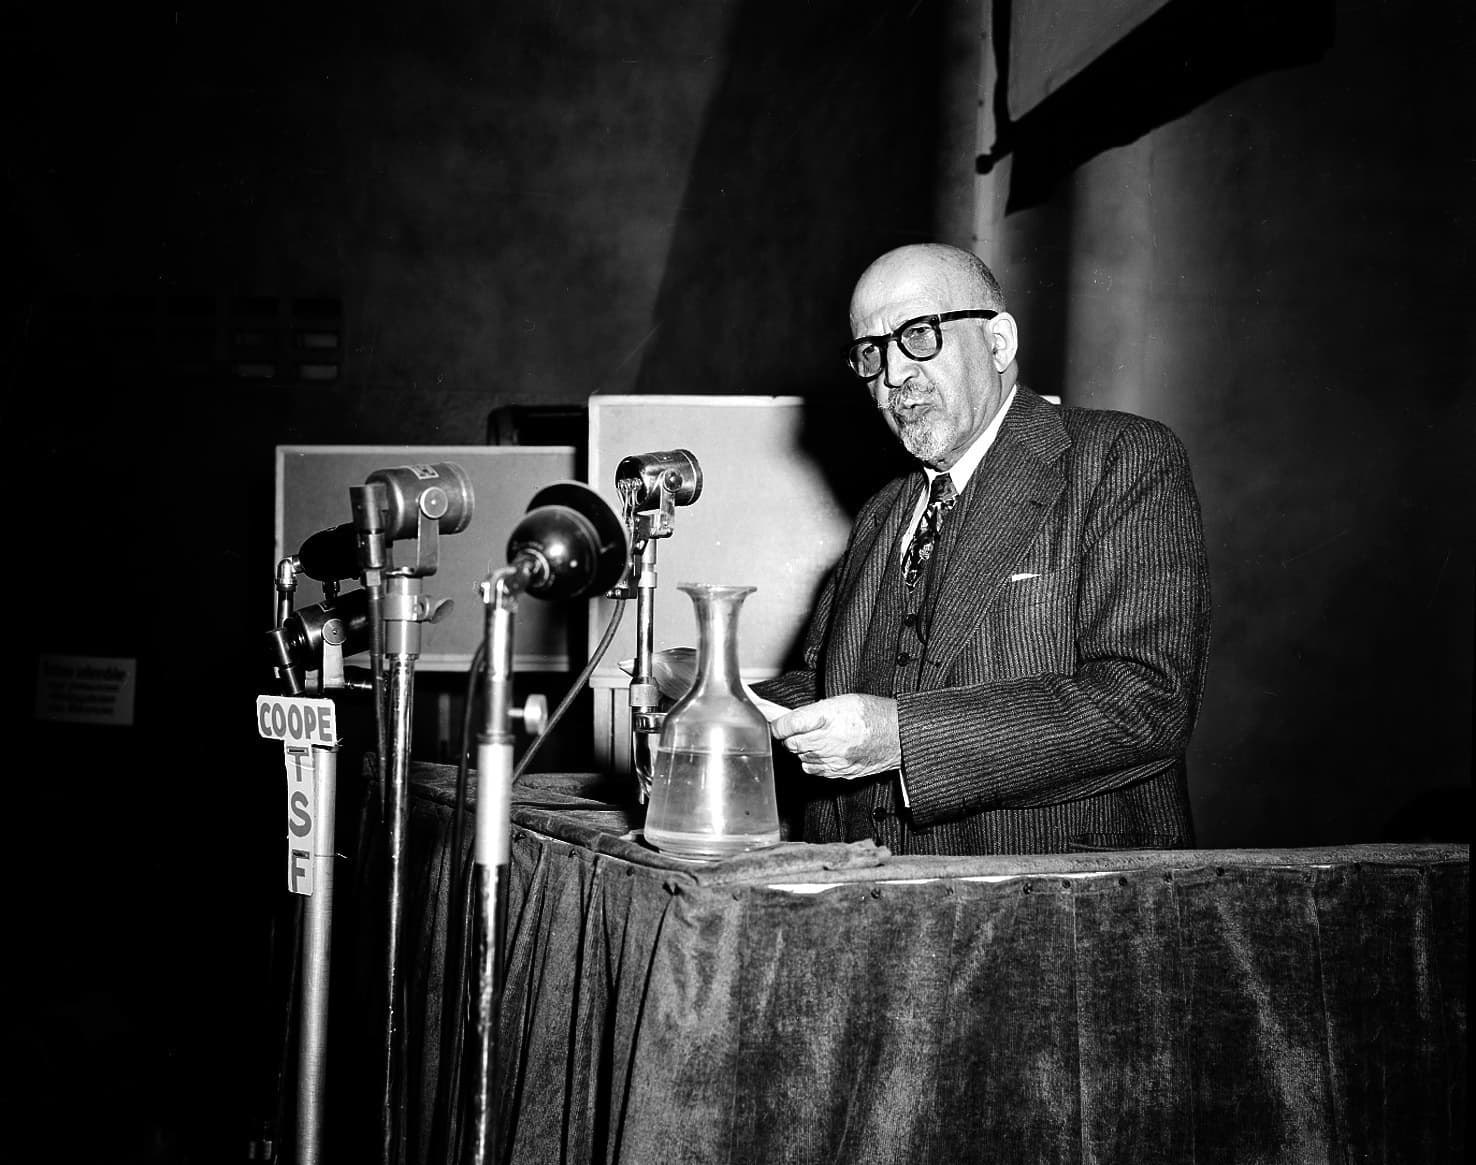 W.E.B. Du Bois, educator, writer and co-chairman of the U.S. delegation, addresses the World Congress of Partisans of Peace at the Salle Pleyel in Paris, France, on April 22, 1949. A Harvard University choir group that rejected author W.E.B. Du Bois when he was a student because he was black will be celebrating his work through a musical tribute. (AP Photo, File)